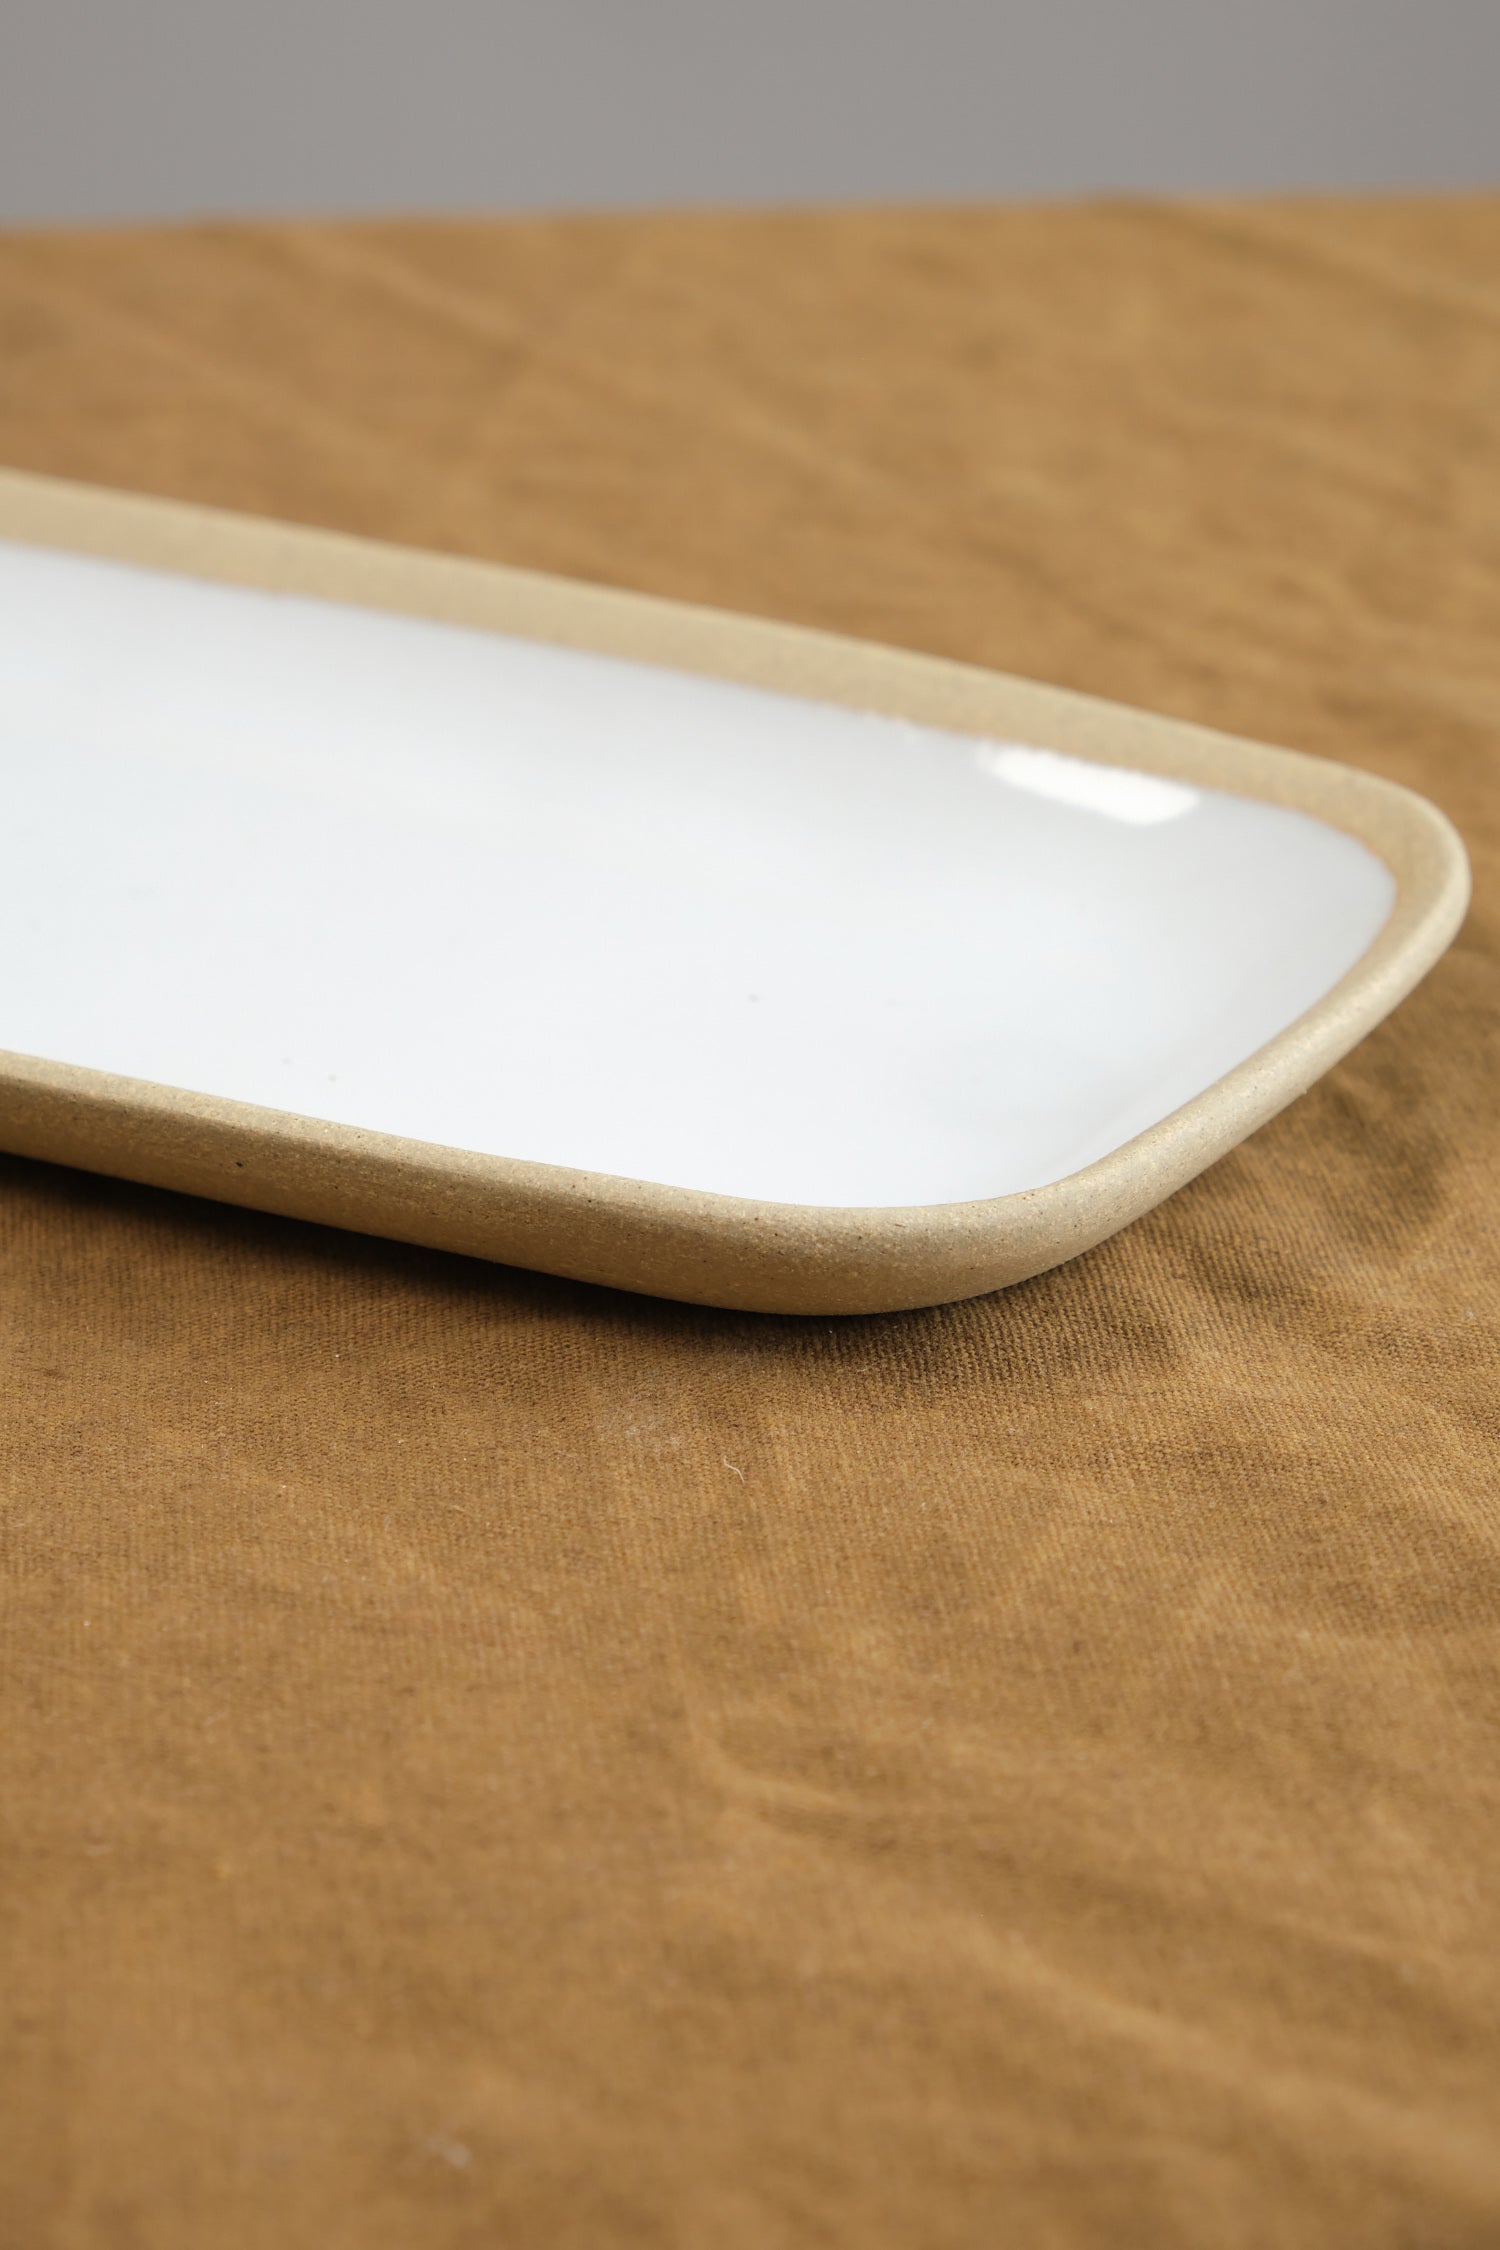 End of Medium Rectangle Serving Tray